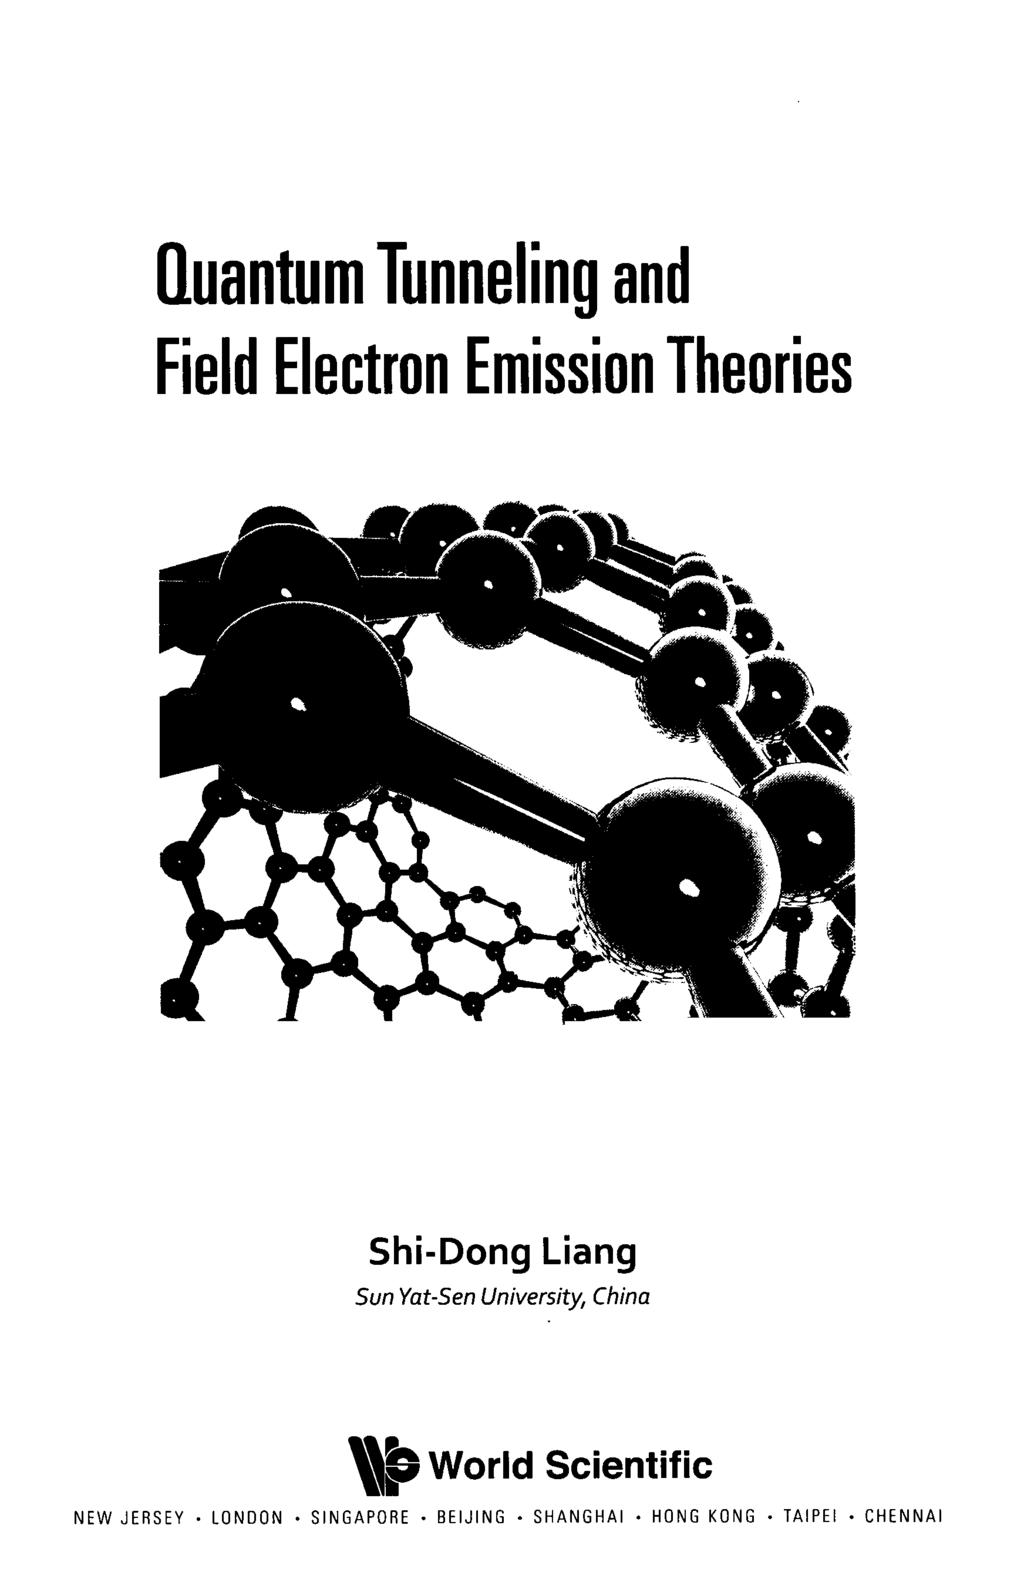 BEIJING SHANGHAI Quantum Tunneling and Field Electron Emission Theories Shi-Dong Liang Sun